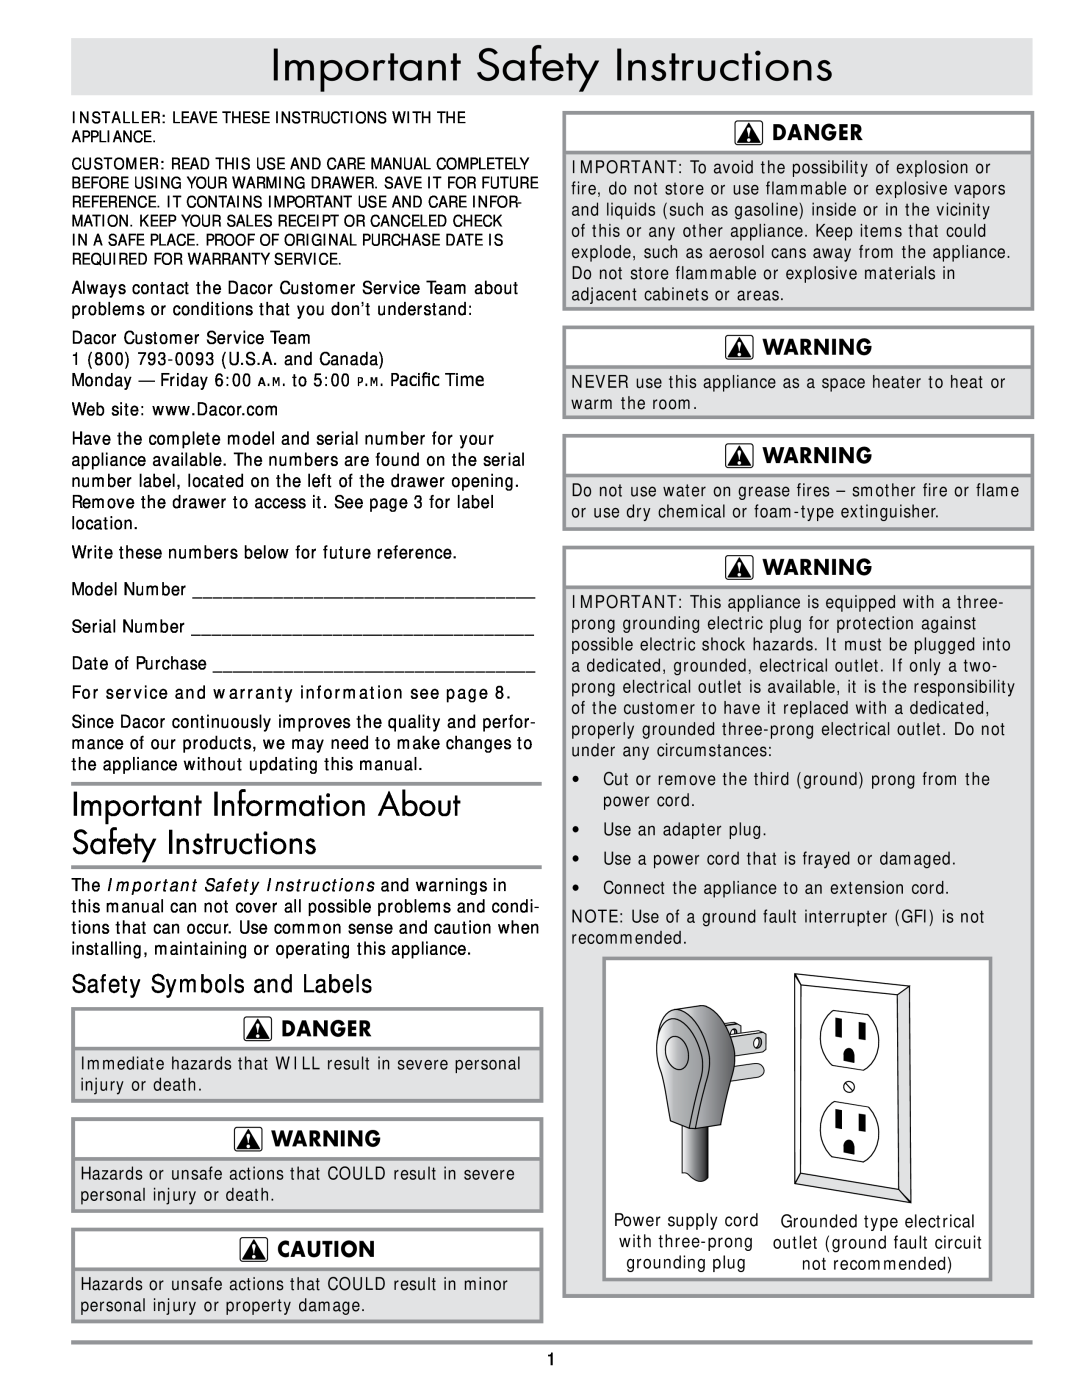 Dacor MRWD27, MRWD30 important safety instructions Important Safety Instructions, Safety Symbols and Labels, danger 